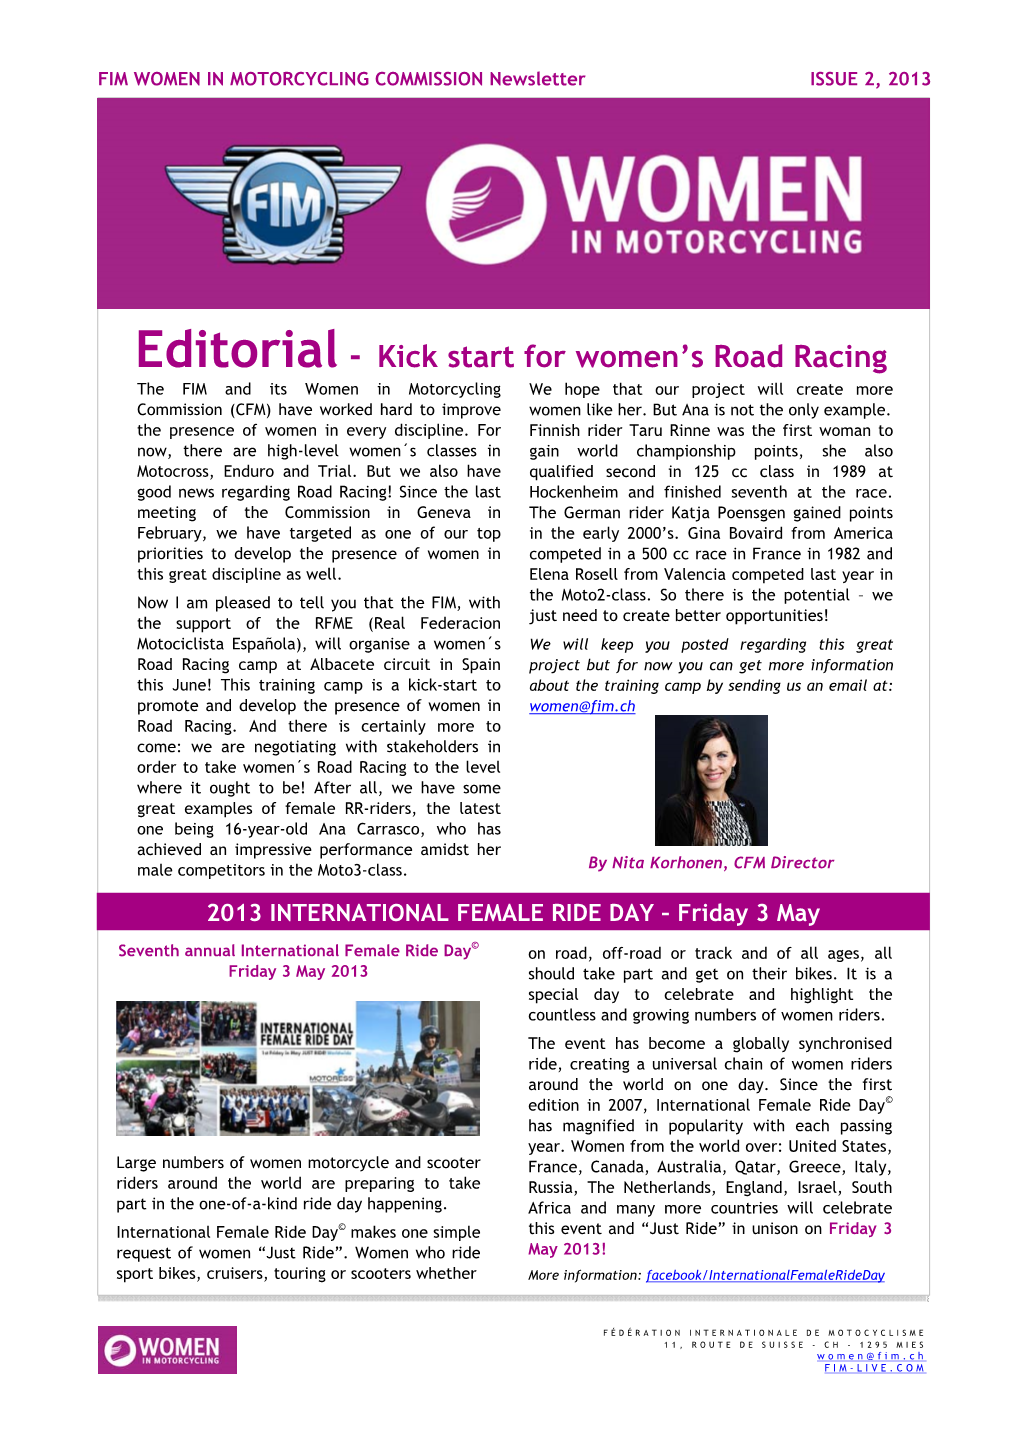 FIM WOMEN in MOTORCYCLING COMMISSION Newsletter ISSUE 2, 2013